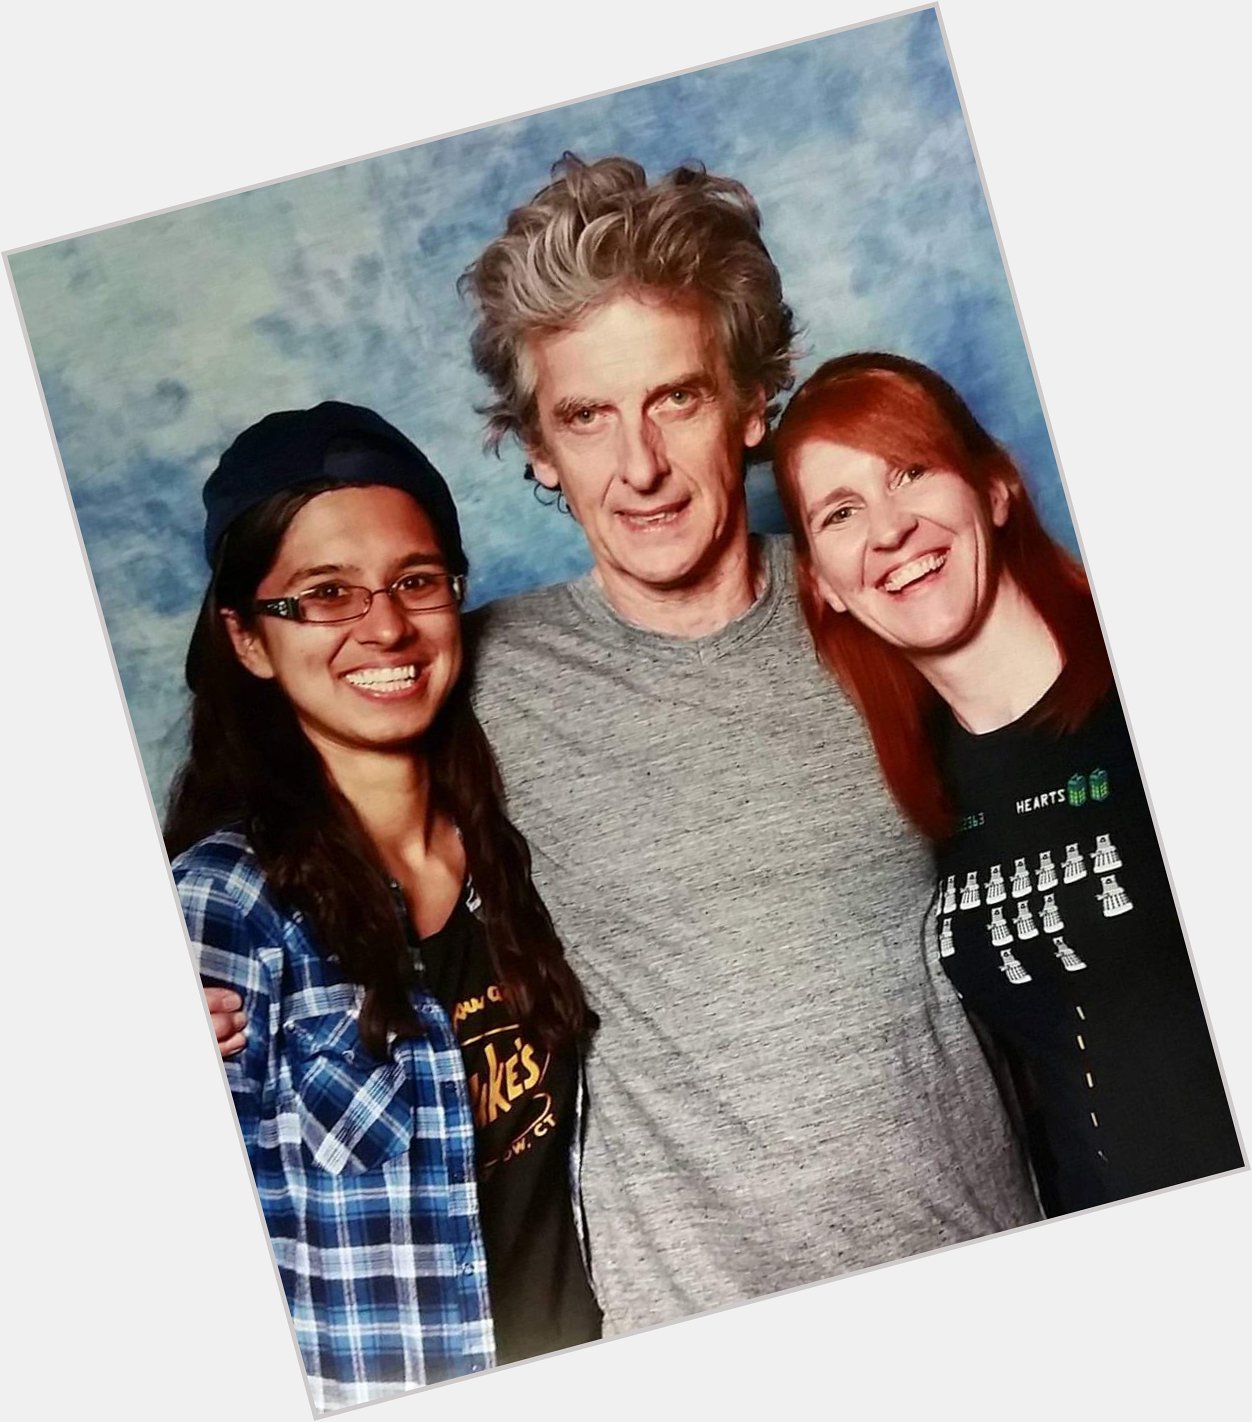 Happy Birthday Peter Capaldi    missing the 12th doctor and your hugs always!  